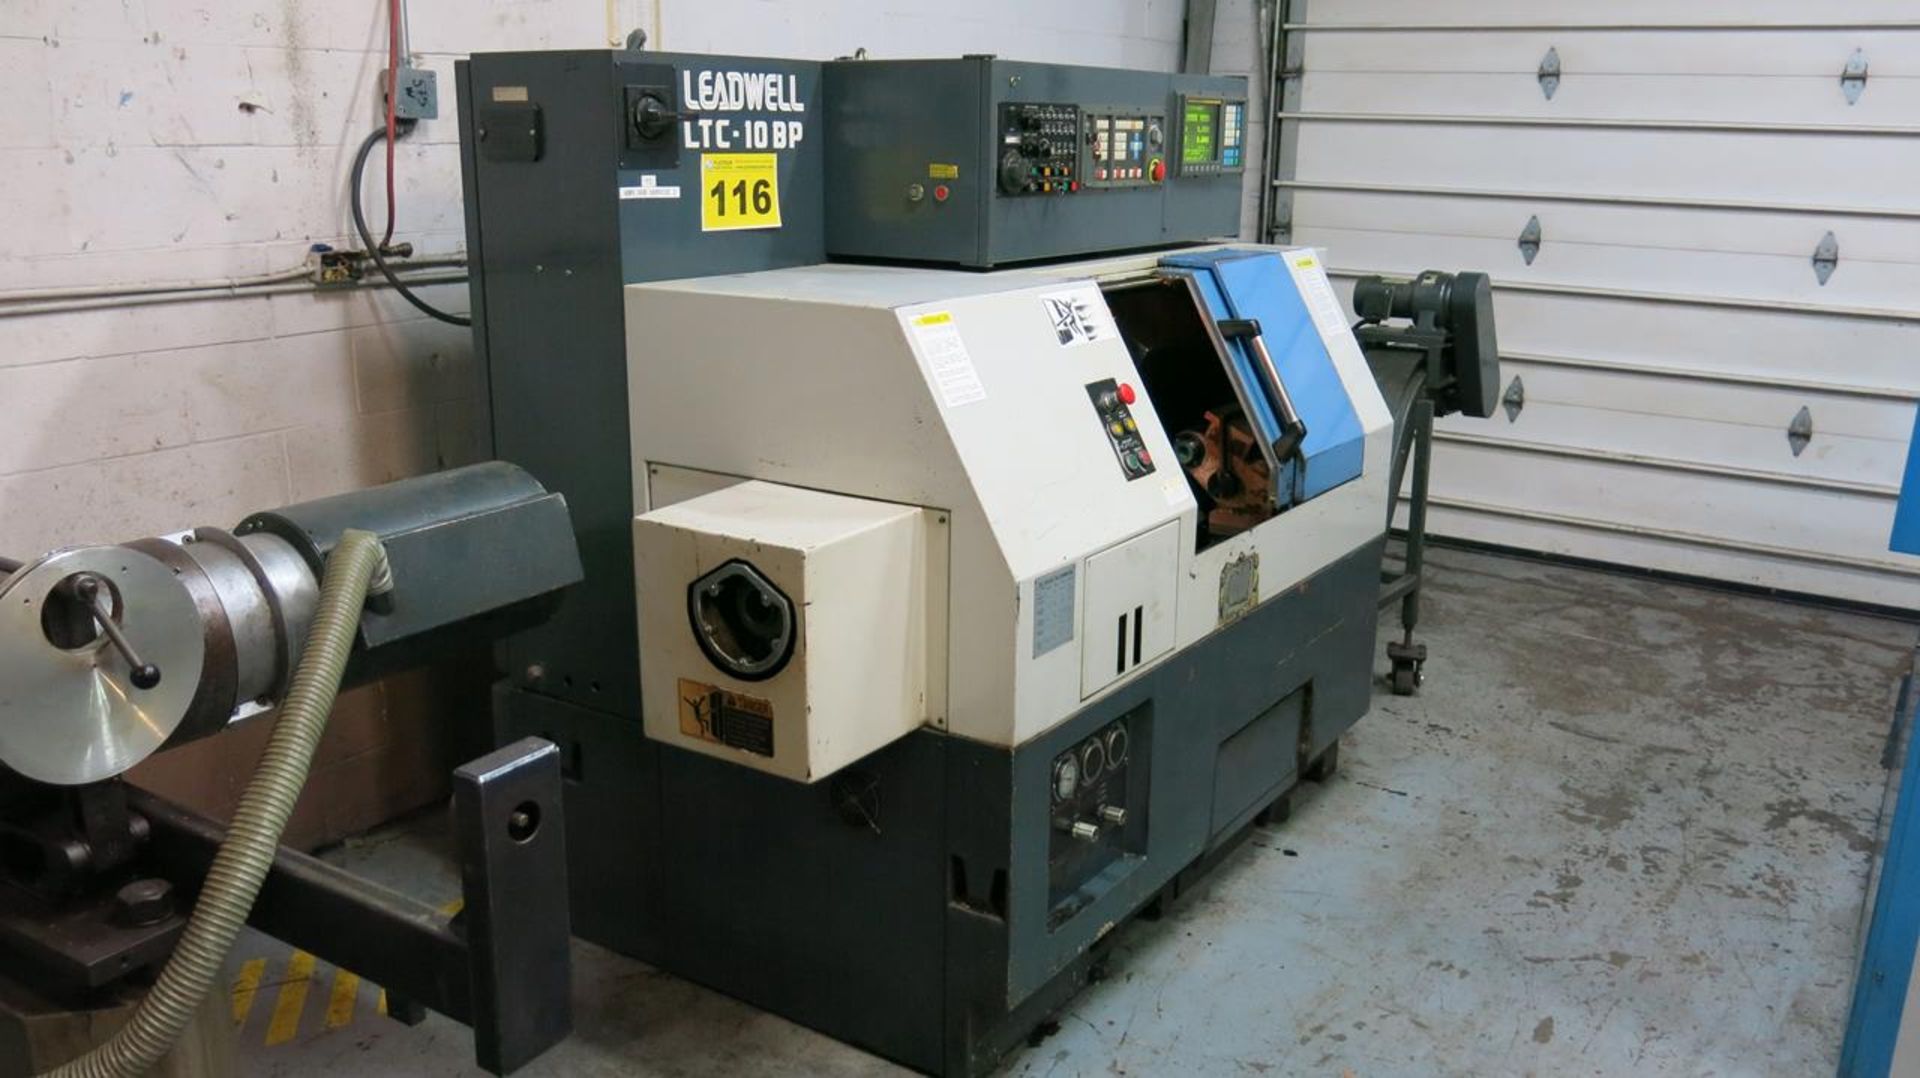 LEADWELL MACHINE CO., LTC-10BP, CNC PRECISION LATHE, 10 HP SPINDLE, 6000 RPM, 8" DIA 3 JAW HYDRAULIC - Image 2 of 8